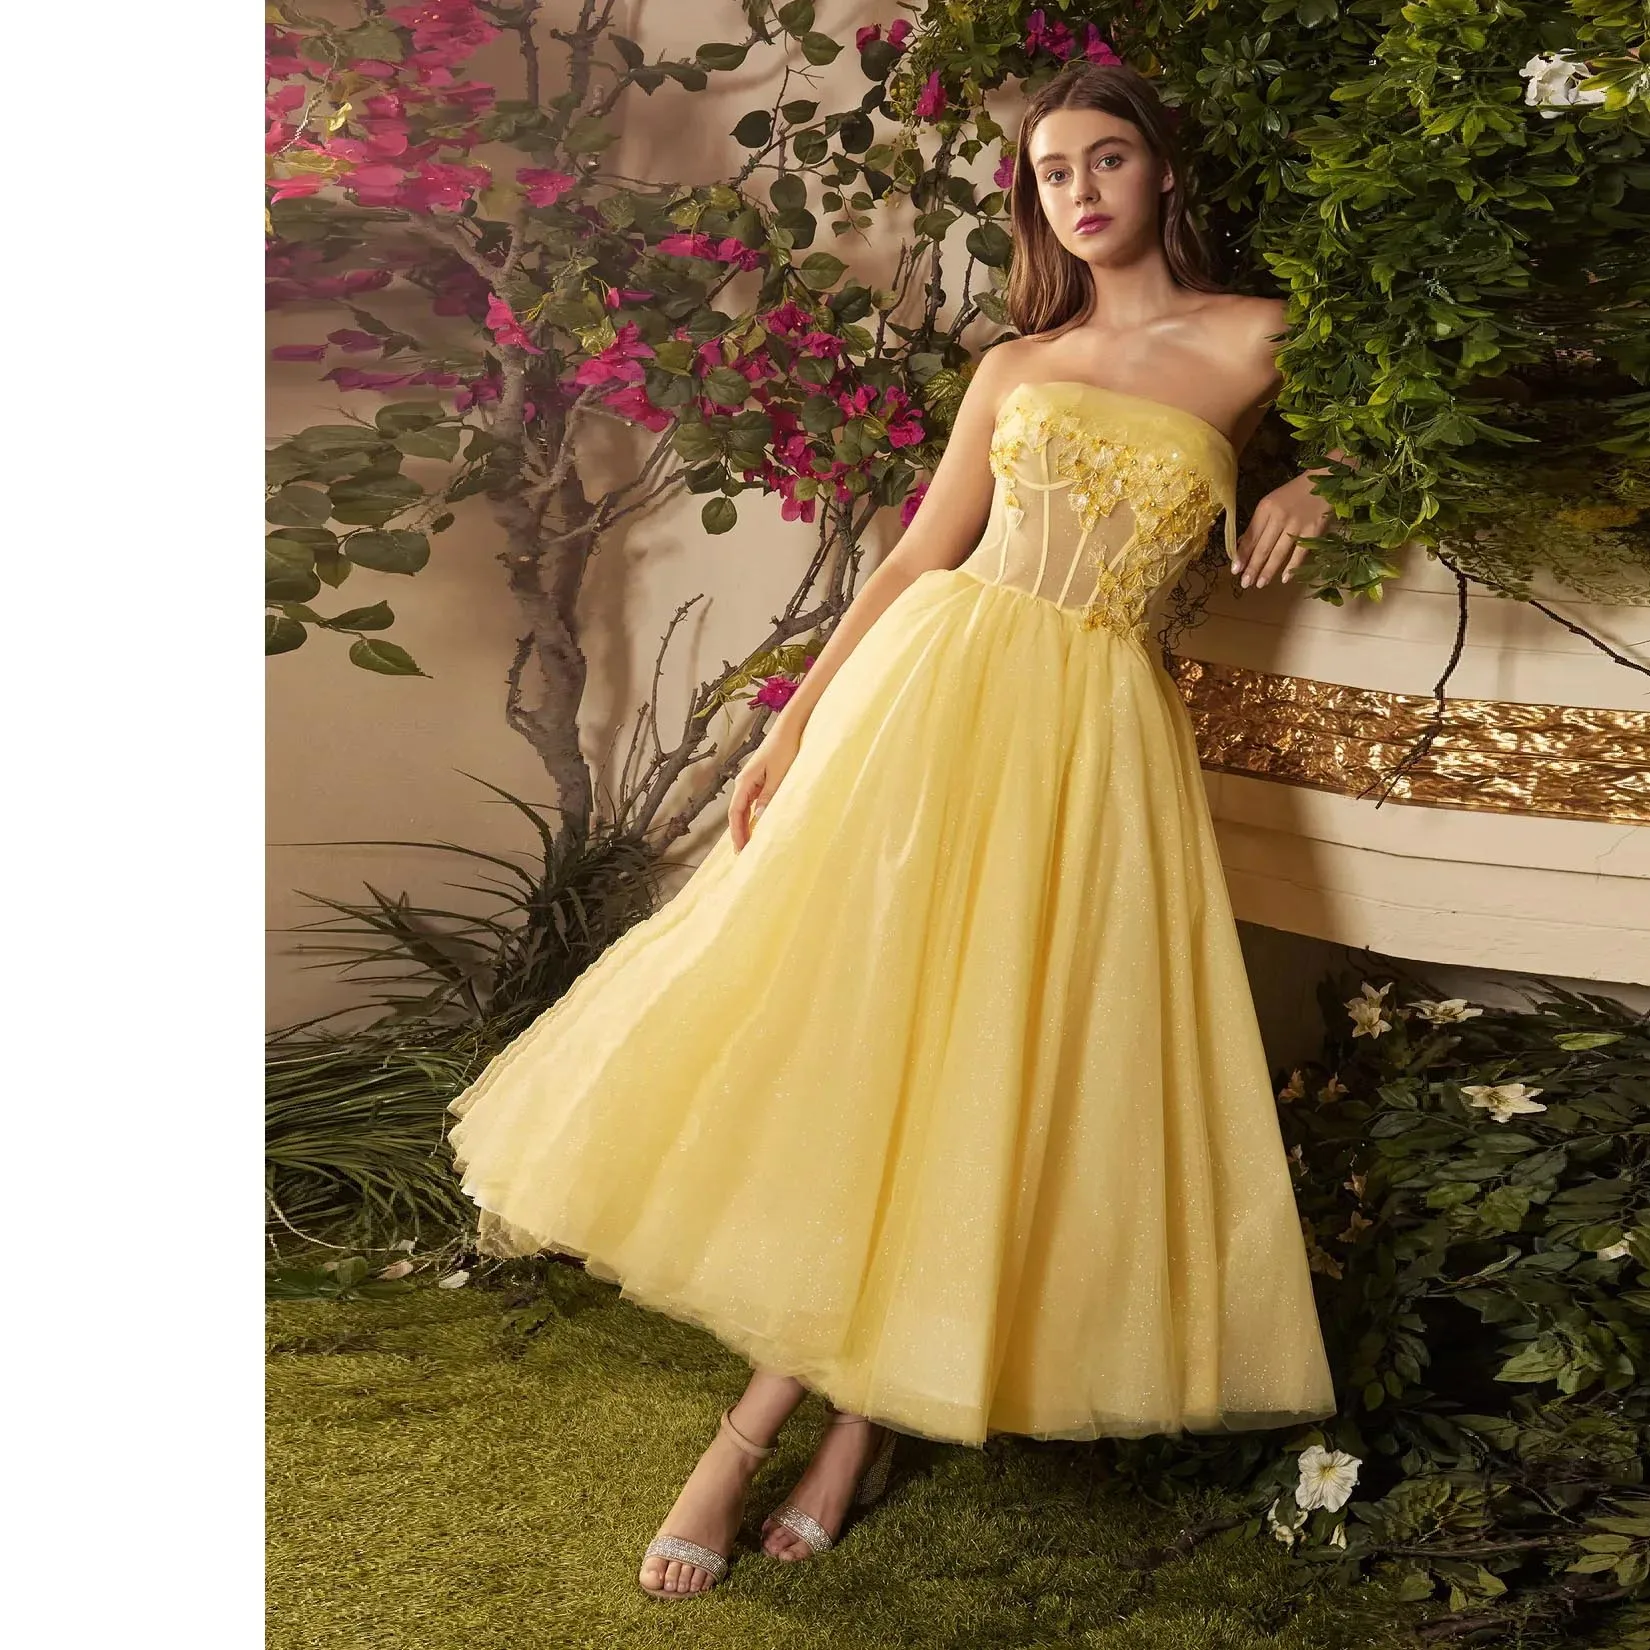 

Elegant Yellow Appliques Beading Cocktail Dress Illusion Tulle Strapless Women Formal Evening Gowns Corset Wedding Party Robes